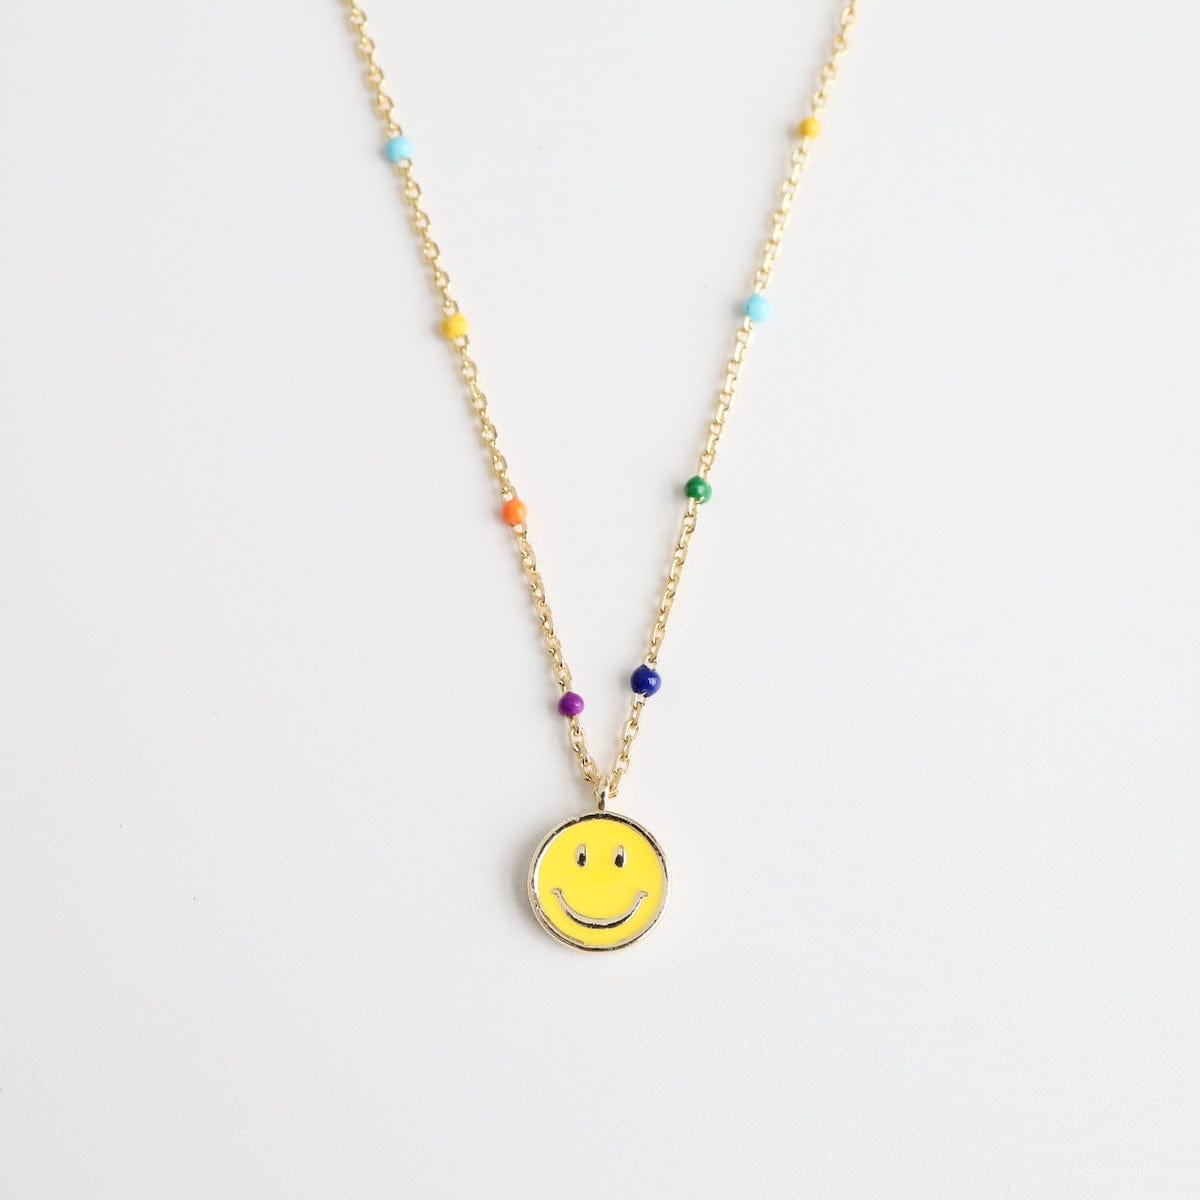 NKL-GPL Rainbow Epoxy Chain with Yellow Enamel Smiley Face Necklace